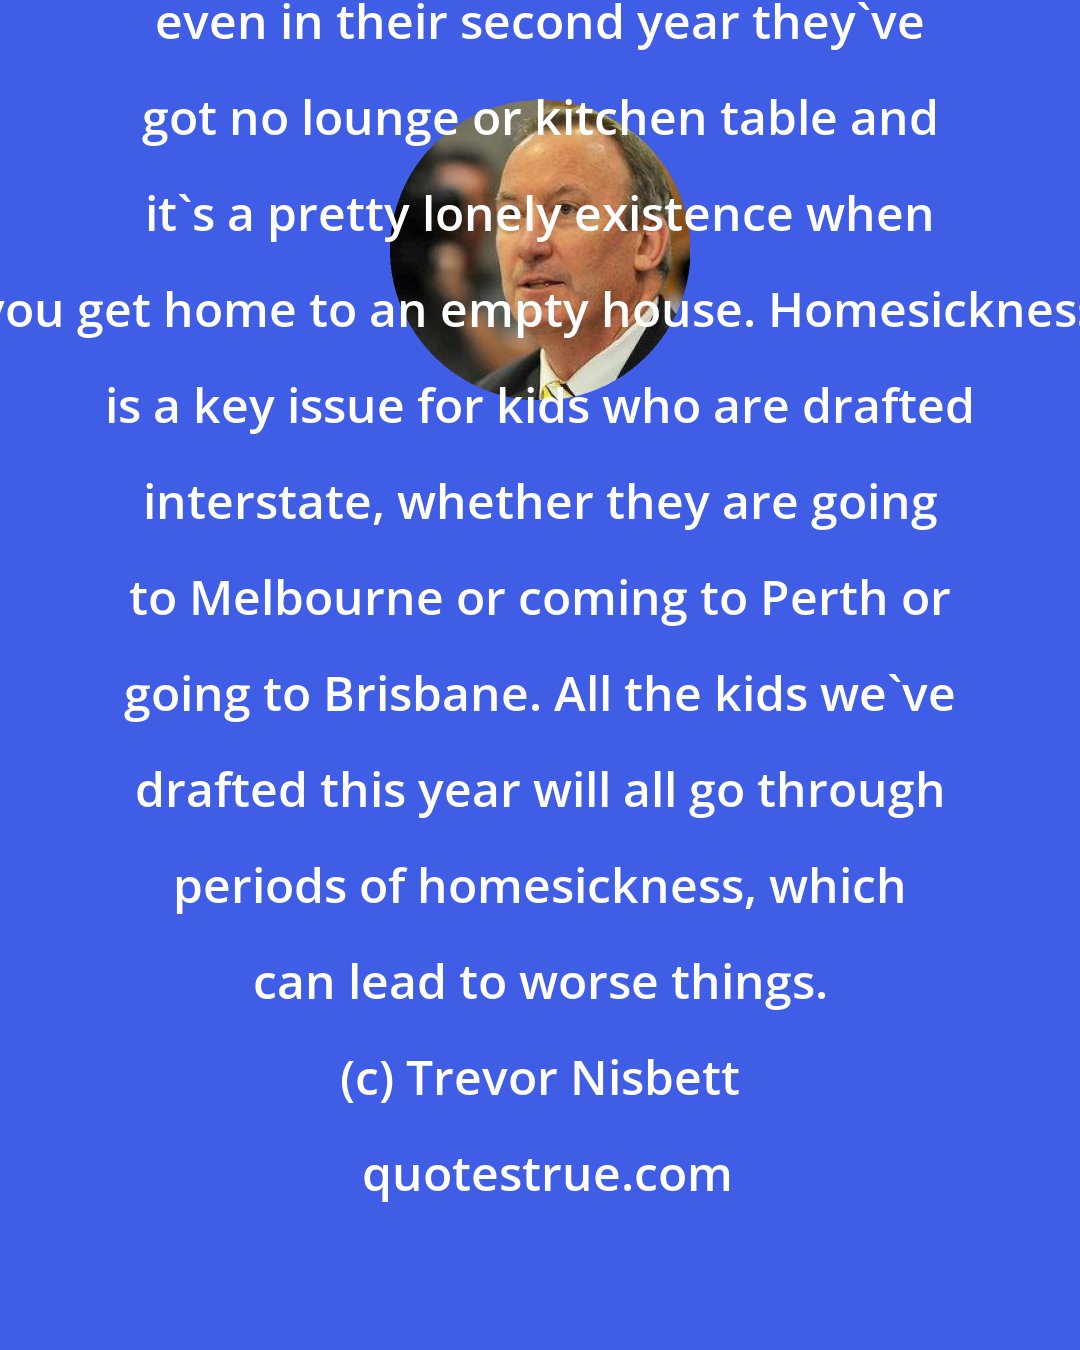 Trevor Nisbett: If they don't board and live by themselves, even in their second year they've got no lounge or kitchen table and it's a pretty lonely existence when you get home to an empty house. Homesickness is a key issue for kids who are drafted interstate, whether they are going to Melbourne or coming to Perth or going to Brisbane. All the kids we've drafted this year will all go through periods of homesickness, which can lead to worse things.